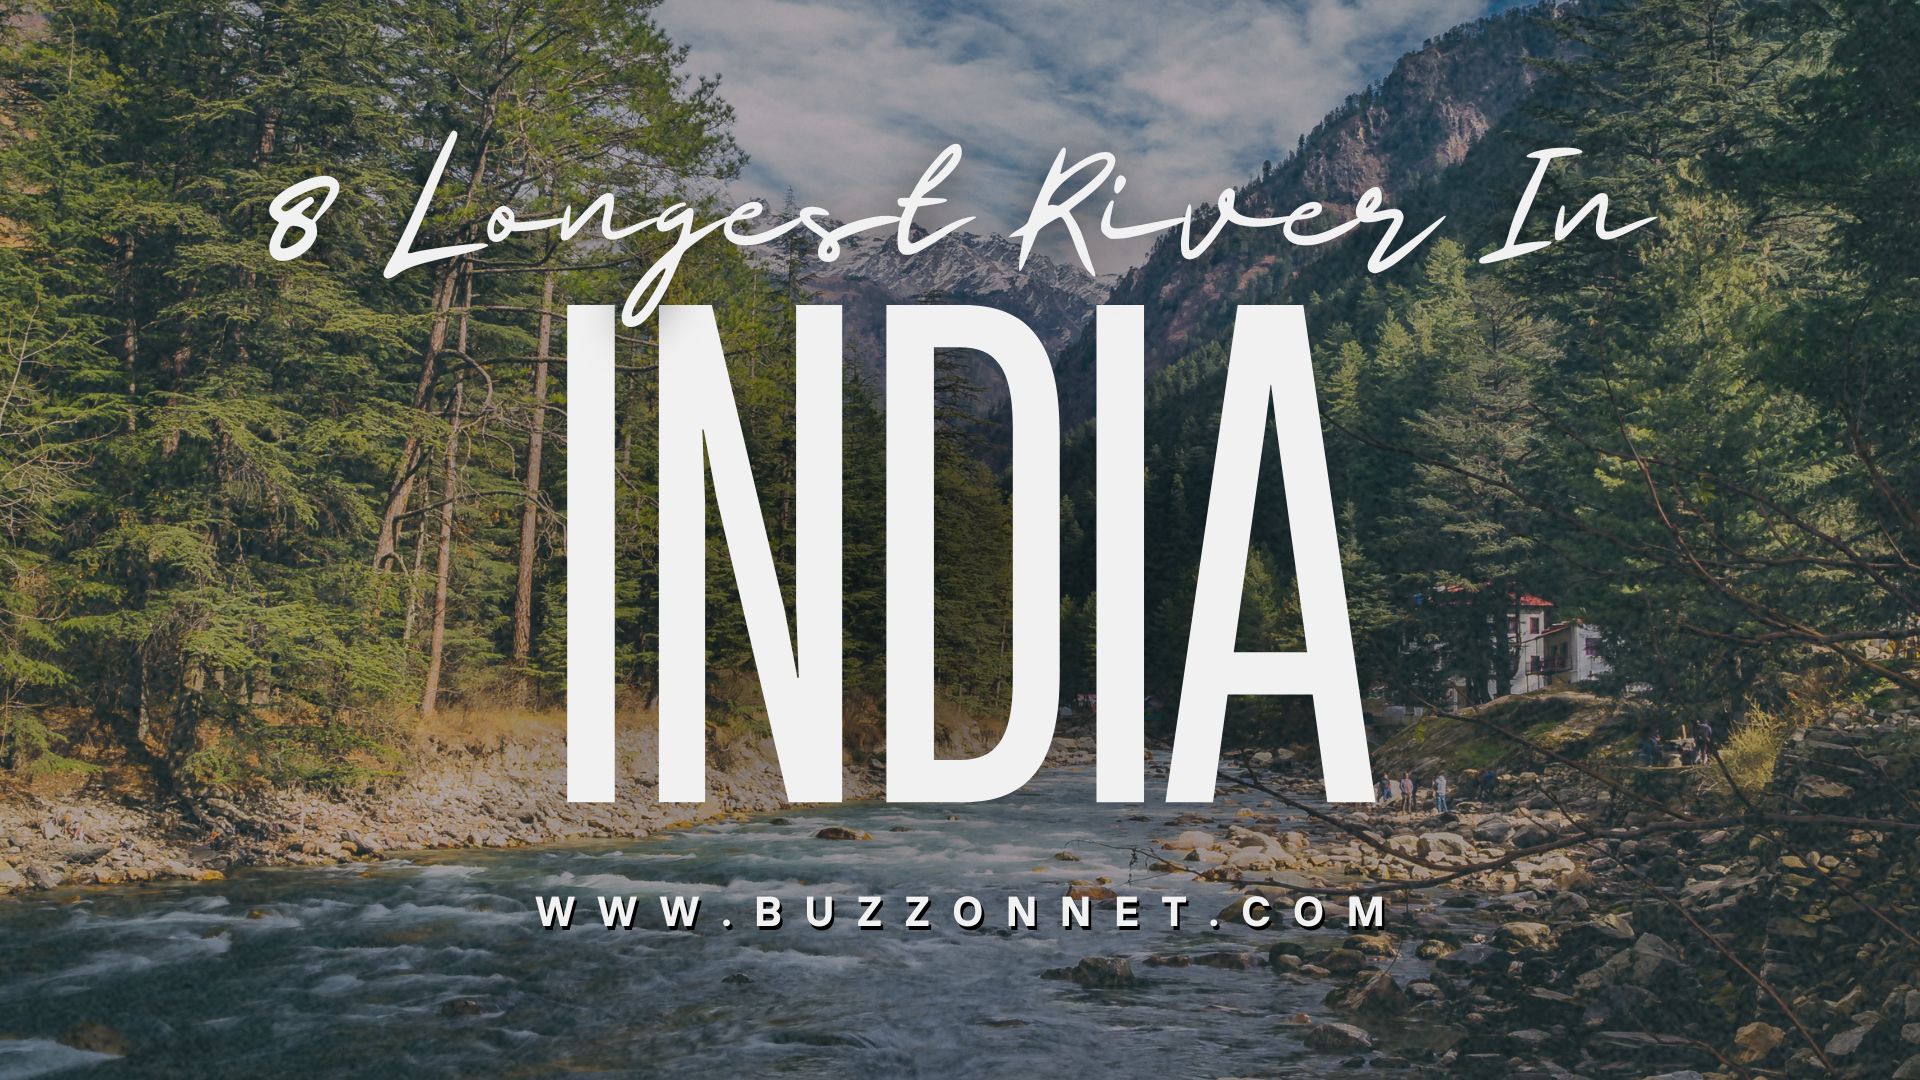 8 Longest River In India That You Should Visit